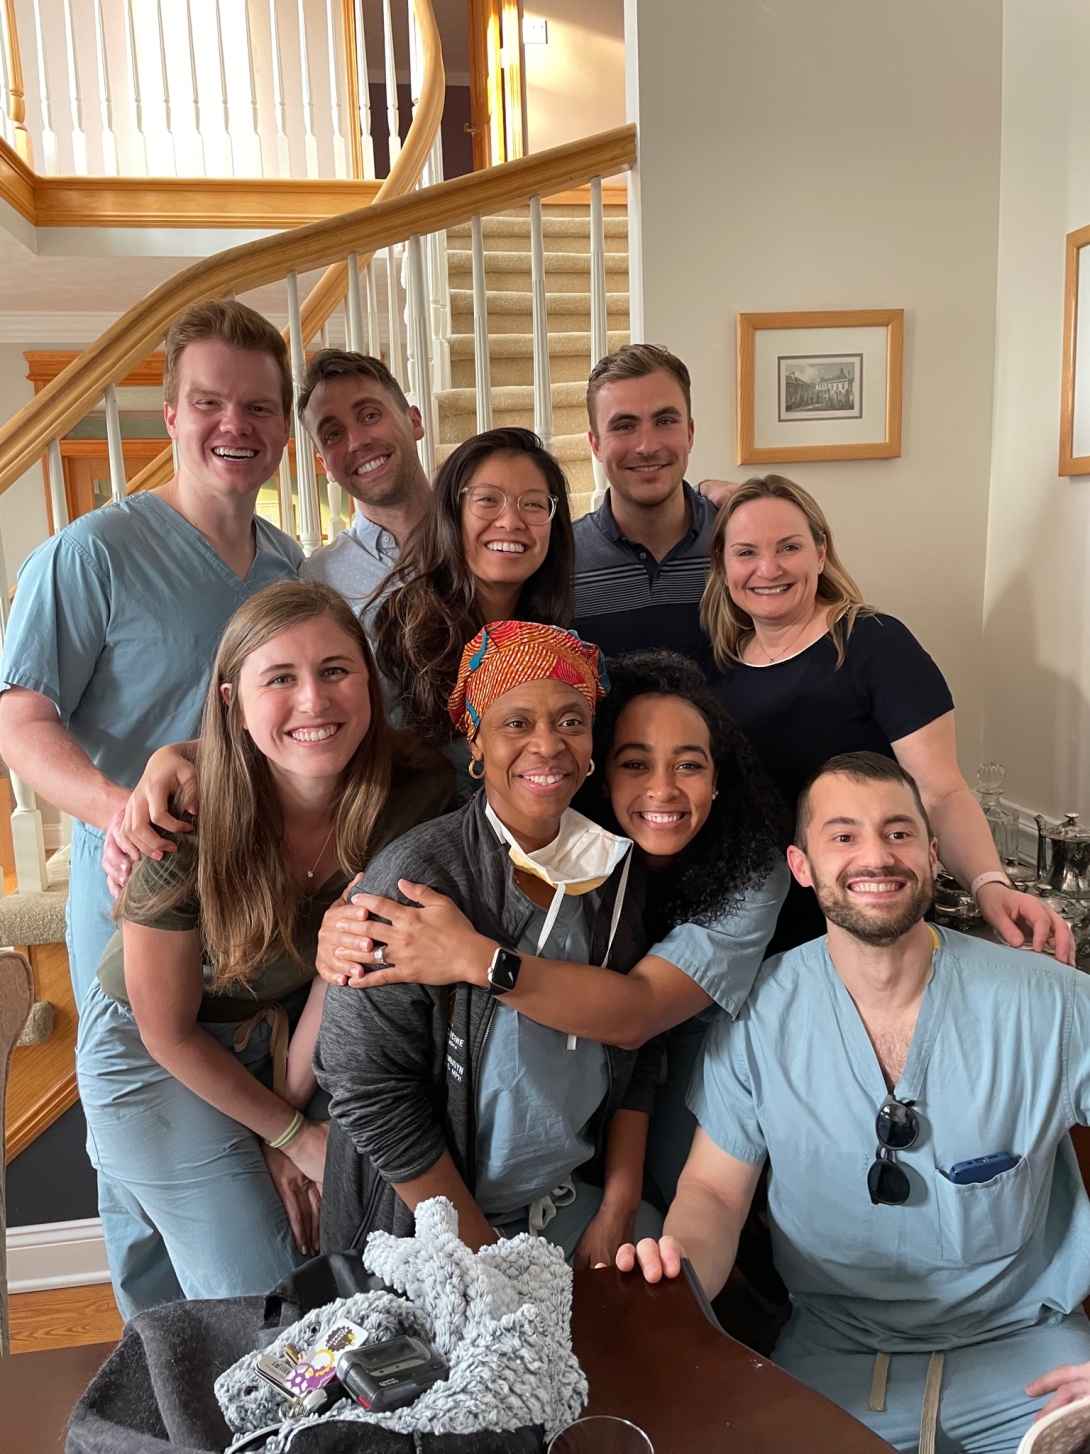  obgyn residents gather together in home 